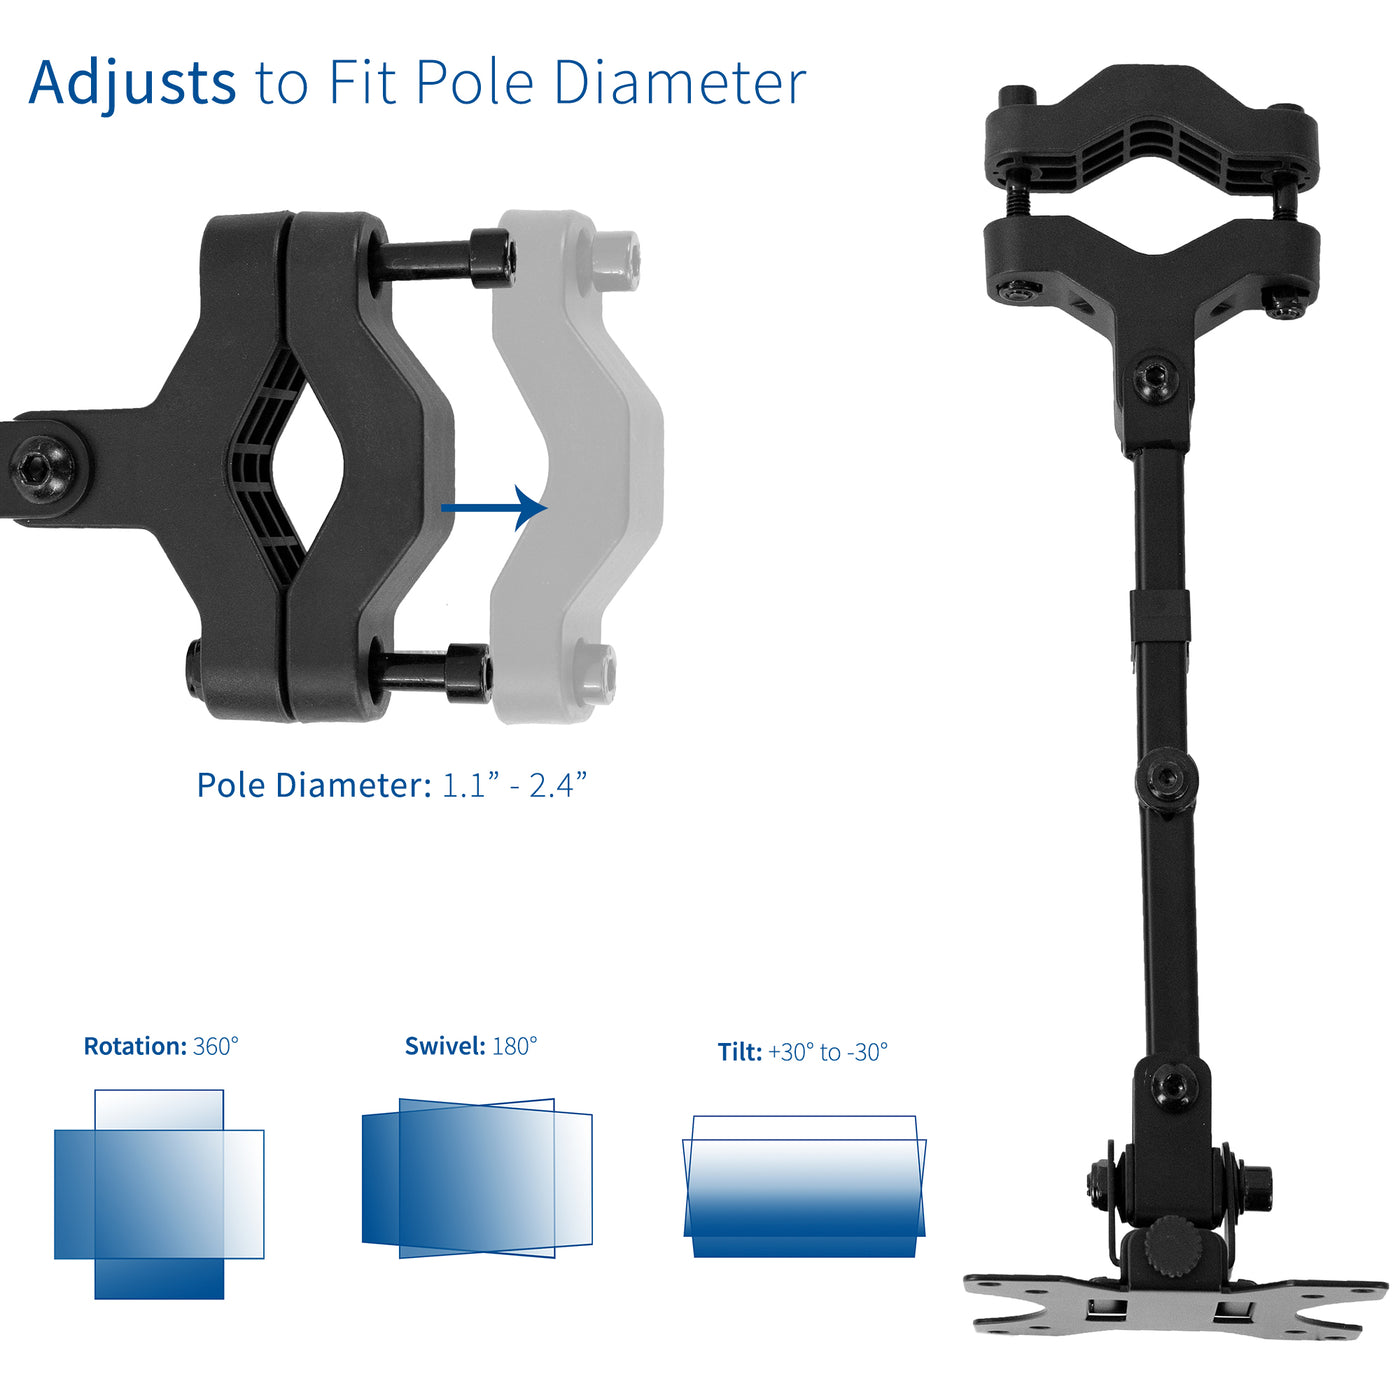 vivo Steel Universal Full Motion Pole Mount Monitor Arm with Removable 75mm and 100mm VESA Plate, Fits 17 to 32 inch Screens, Black, MOUNT-POLE01A